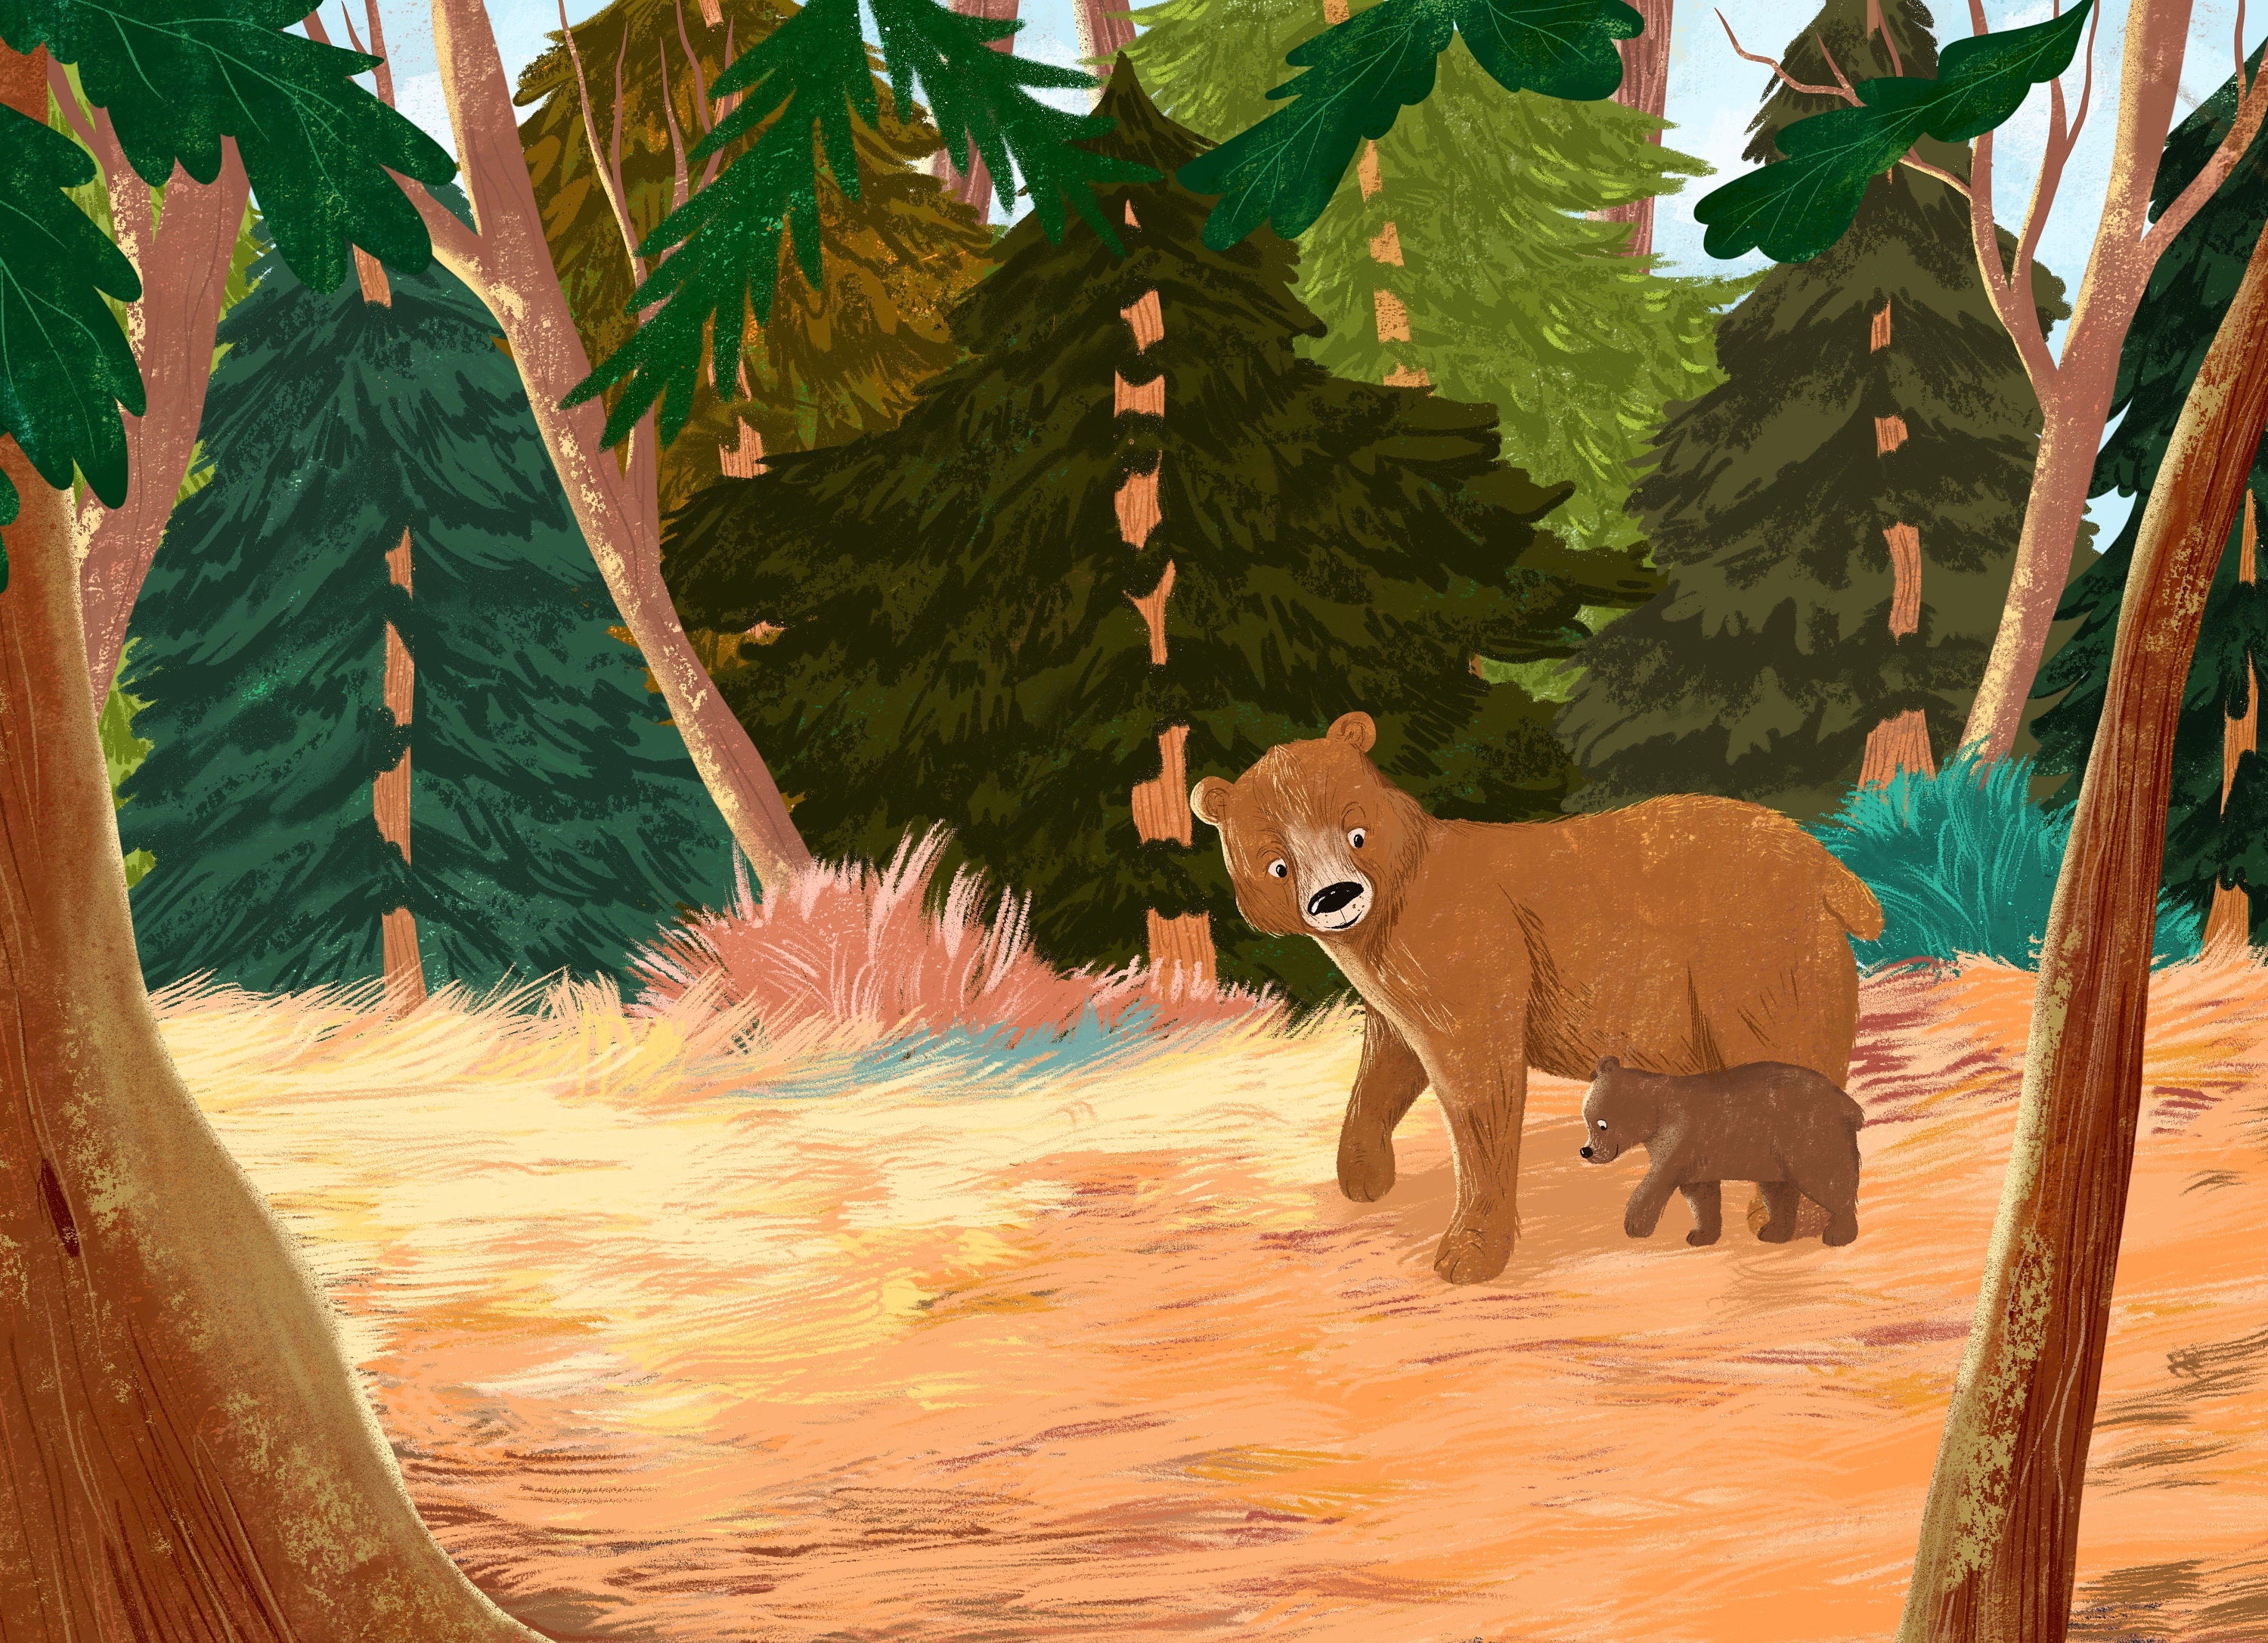 Bear And Cub In Forest Art Print Mother and baby Bear | Etsy